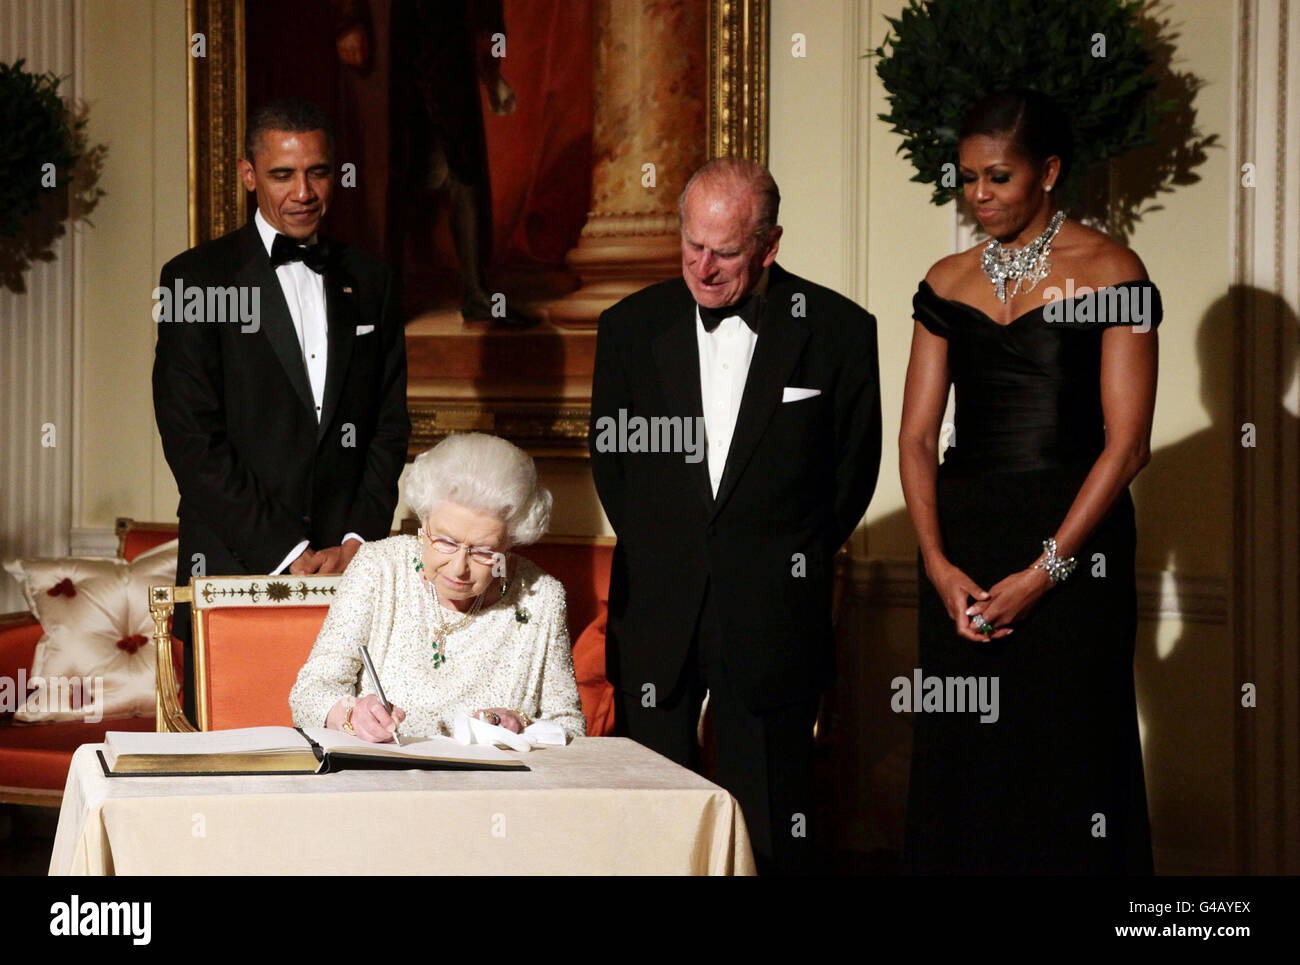 Queen Elizabeth II signs the guest book as she bids farewell to US President Barack Obama and First Lady Michelle Obama, watch by the Duke of Edinburgh at Winfield House - the residence of the Ambassador of the United States of America - in Regent's Park, London. Stock Photo